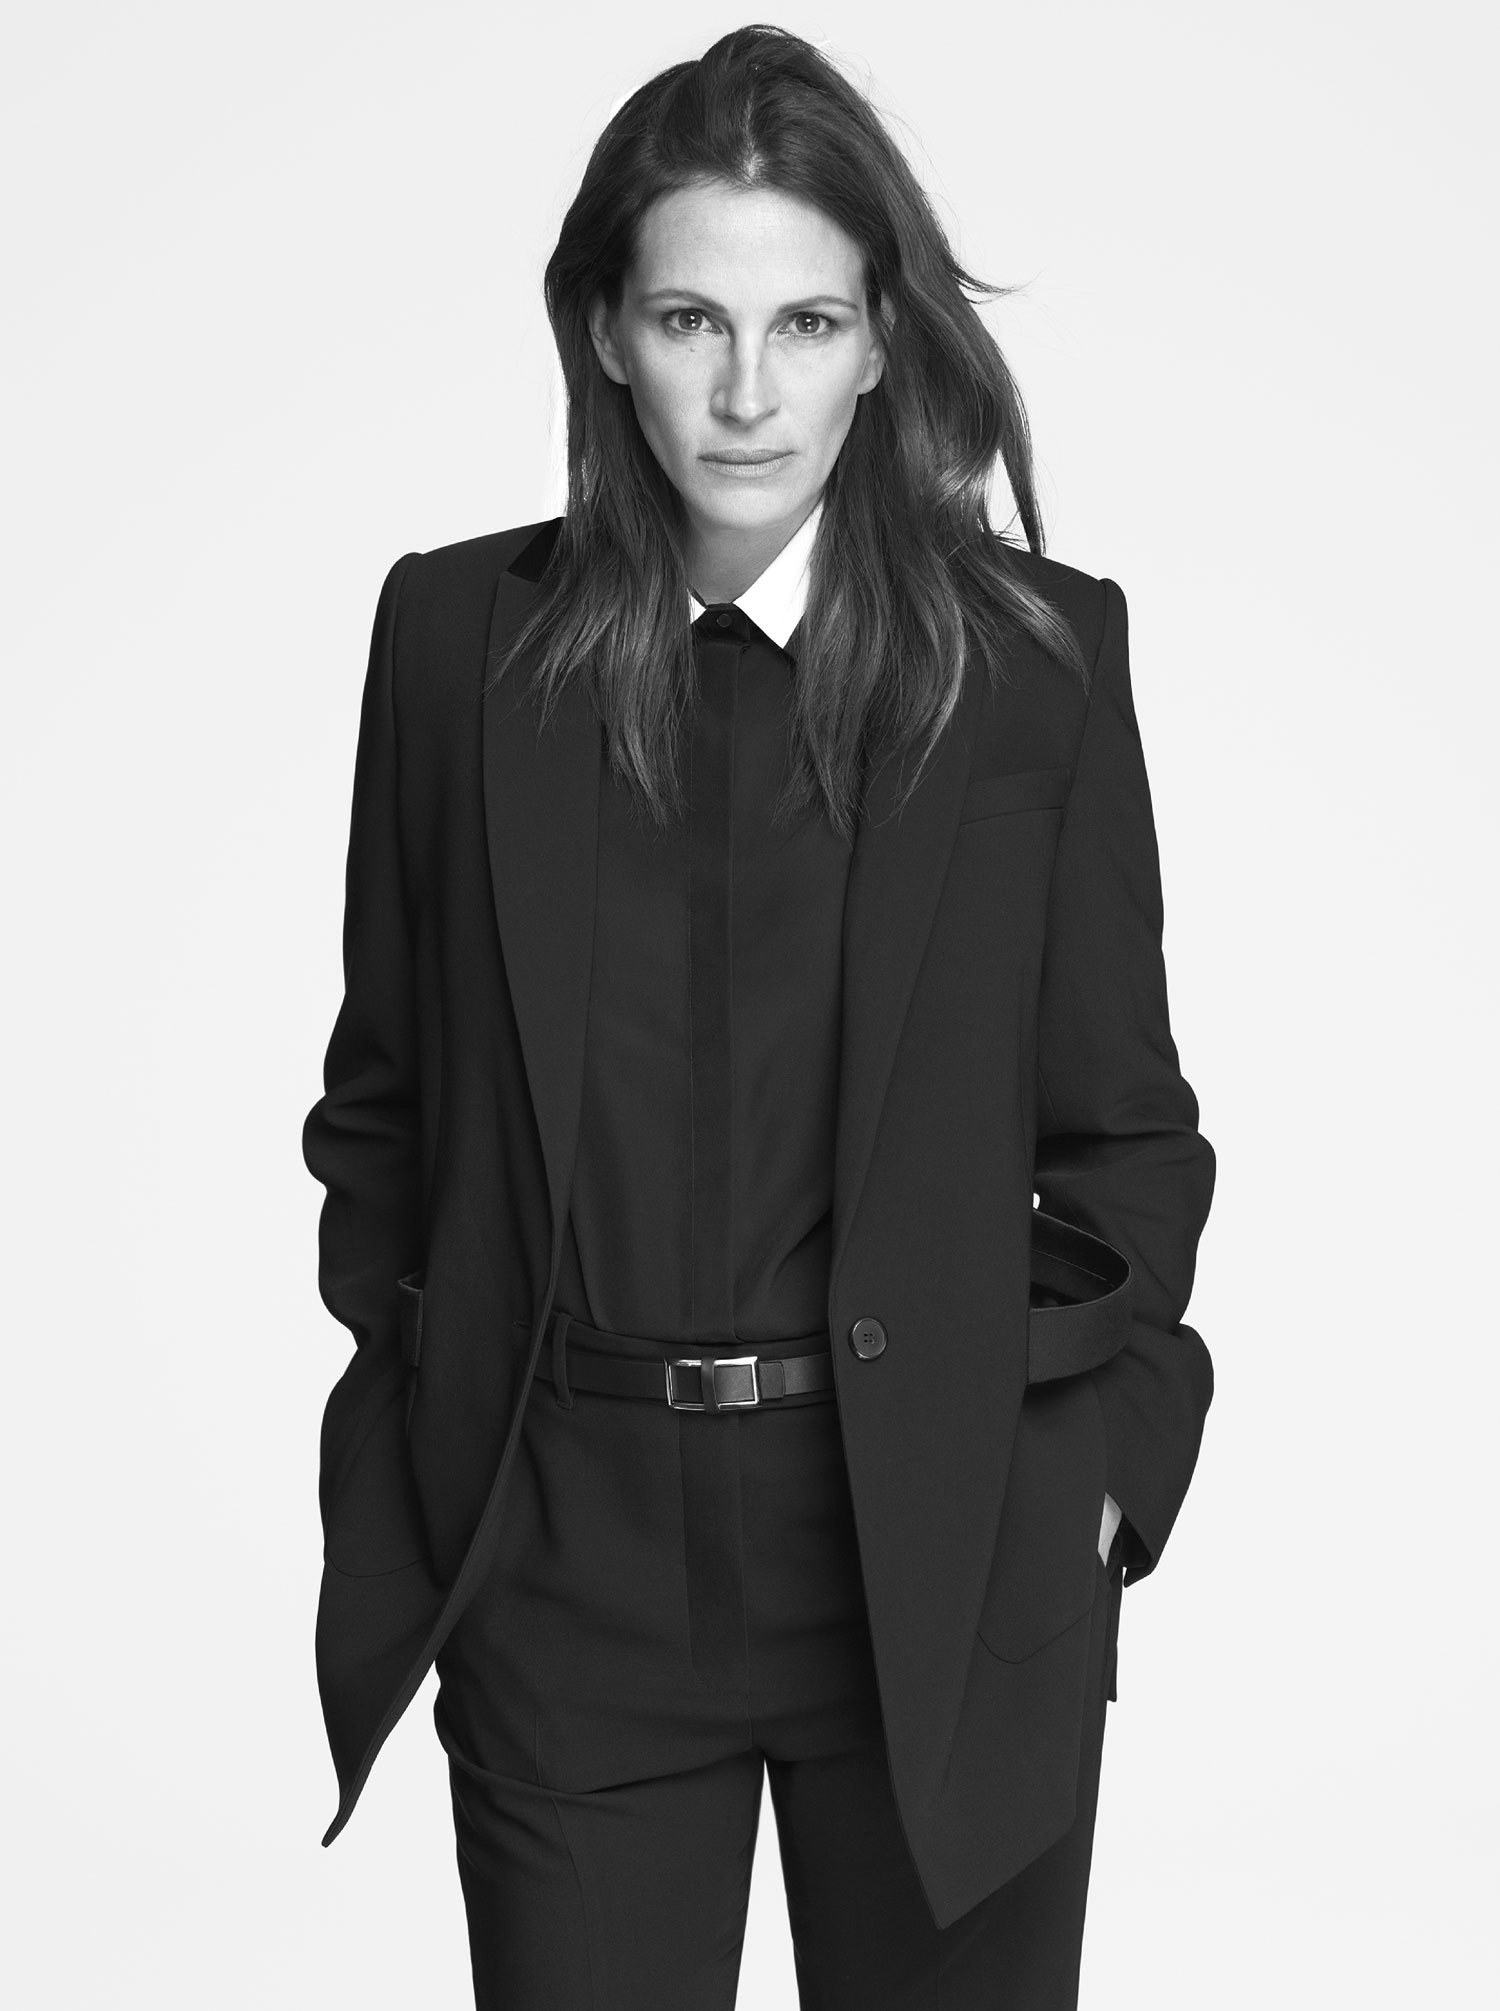 ​julia roberts is the new face of givenchy